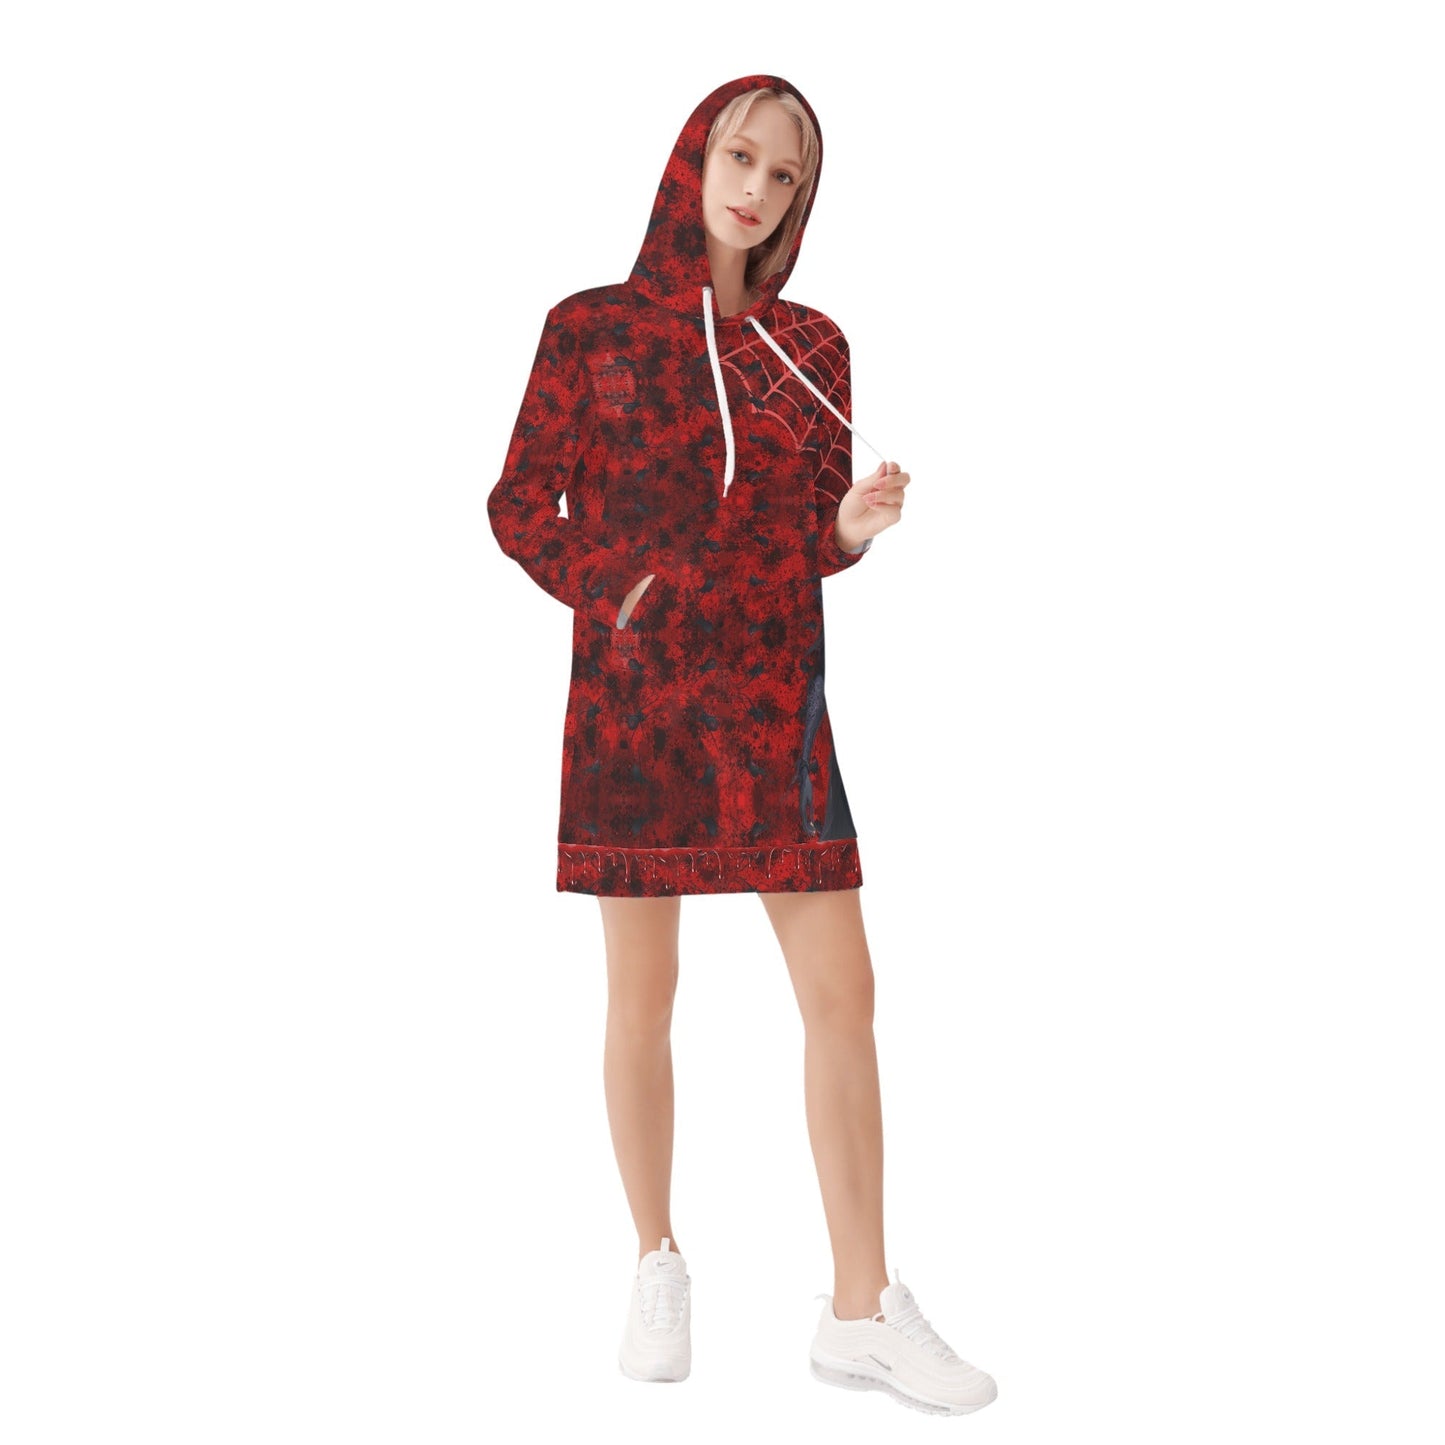 Stand out  with the  Spider Queen Womens Hoodie Dress  available at Hey Nugget. Grab yours today!